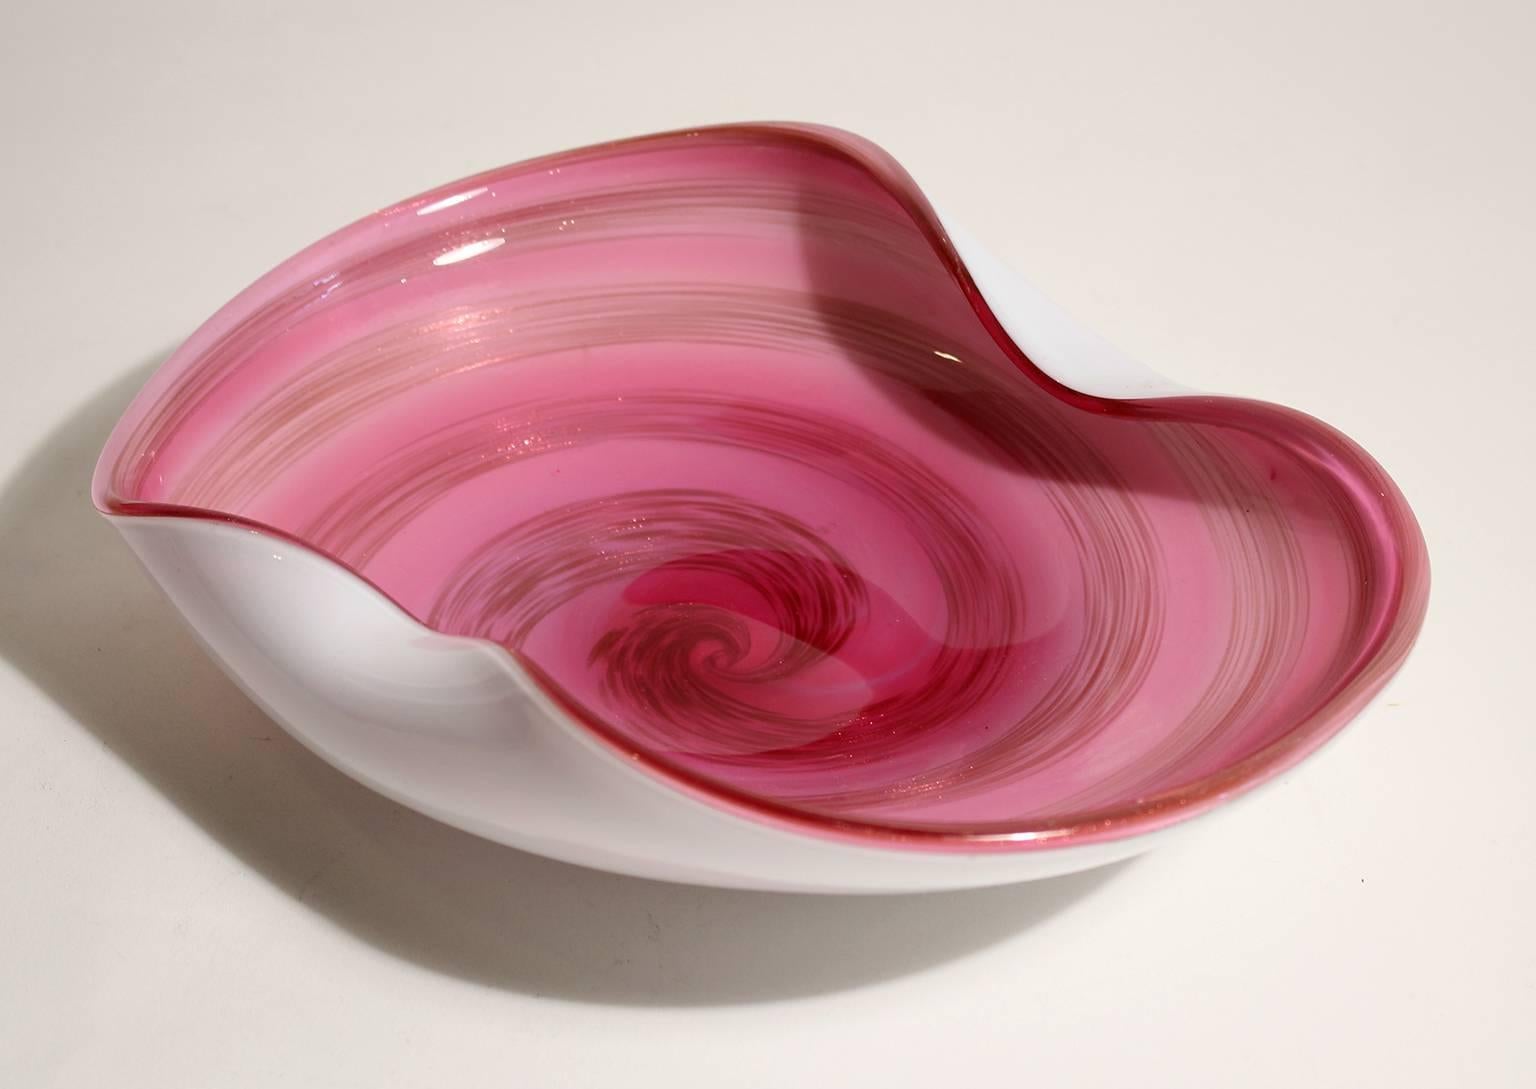 Beautiful folded edge pink and gold speck art glass centerpiece dish bowl made by Alfredo Barbini for Murano glass, circa 1950s. Made in Italy. In excellent condition. Measures: 10 1/2